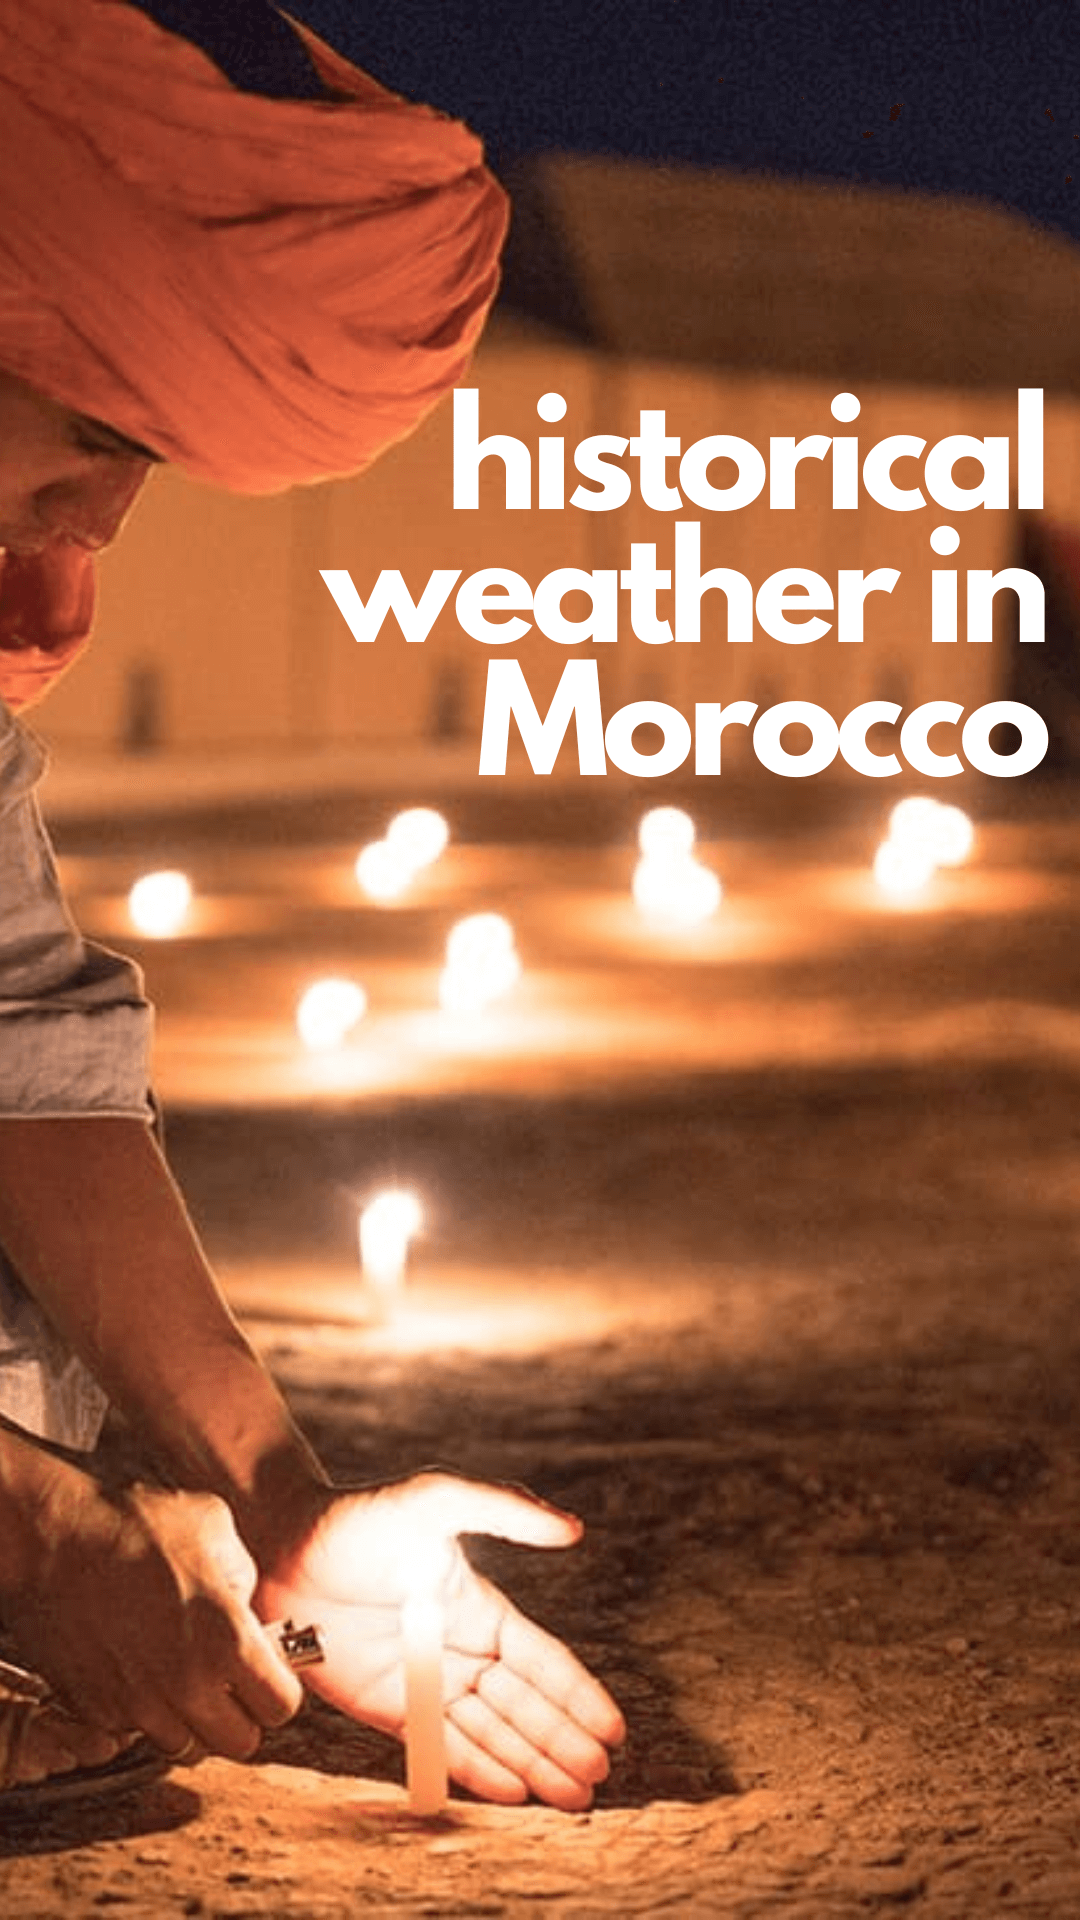 Historical weather in Morocco by city and season